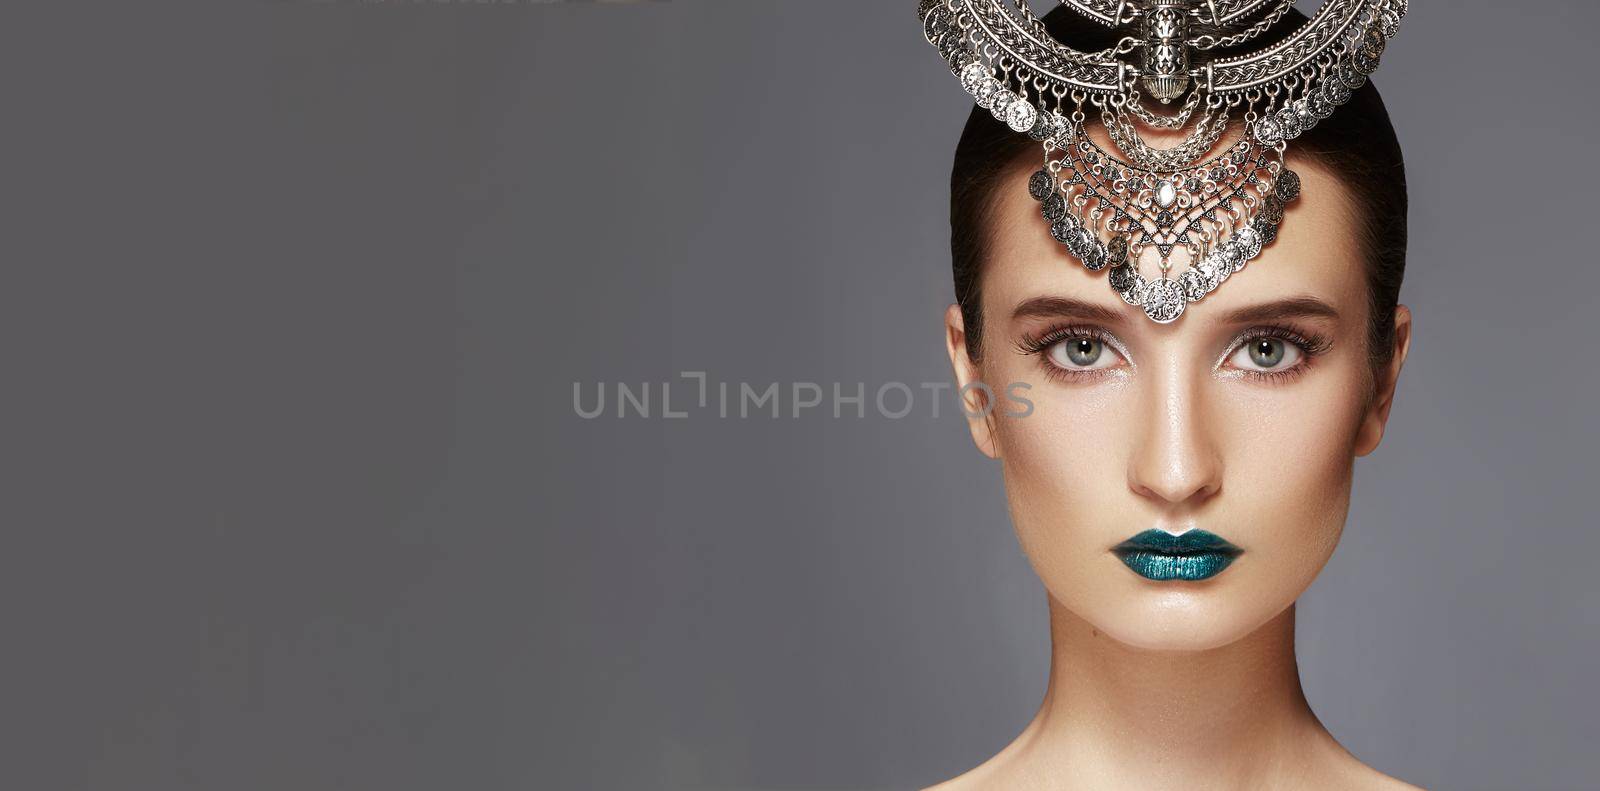 Beautiful Woman with Silver Diadem. Modern Indian Fashion Style. Jewelry Luxury Accessories. Bright Make-up, sexy metallic Lips